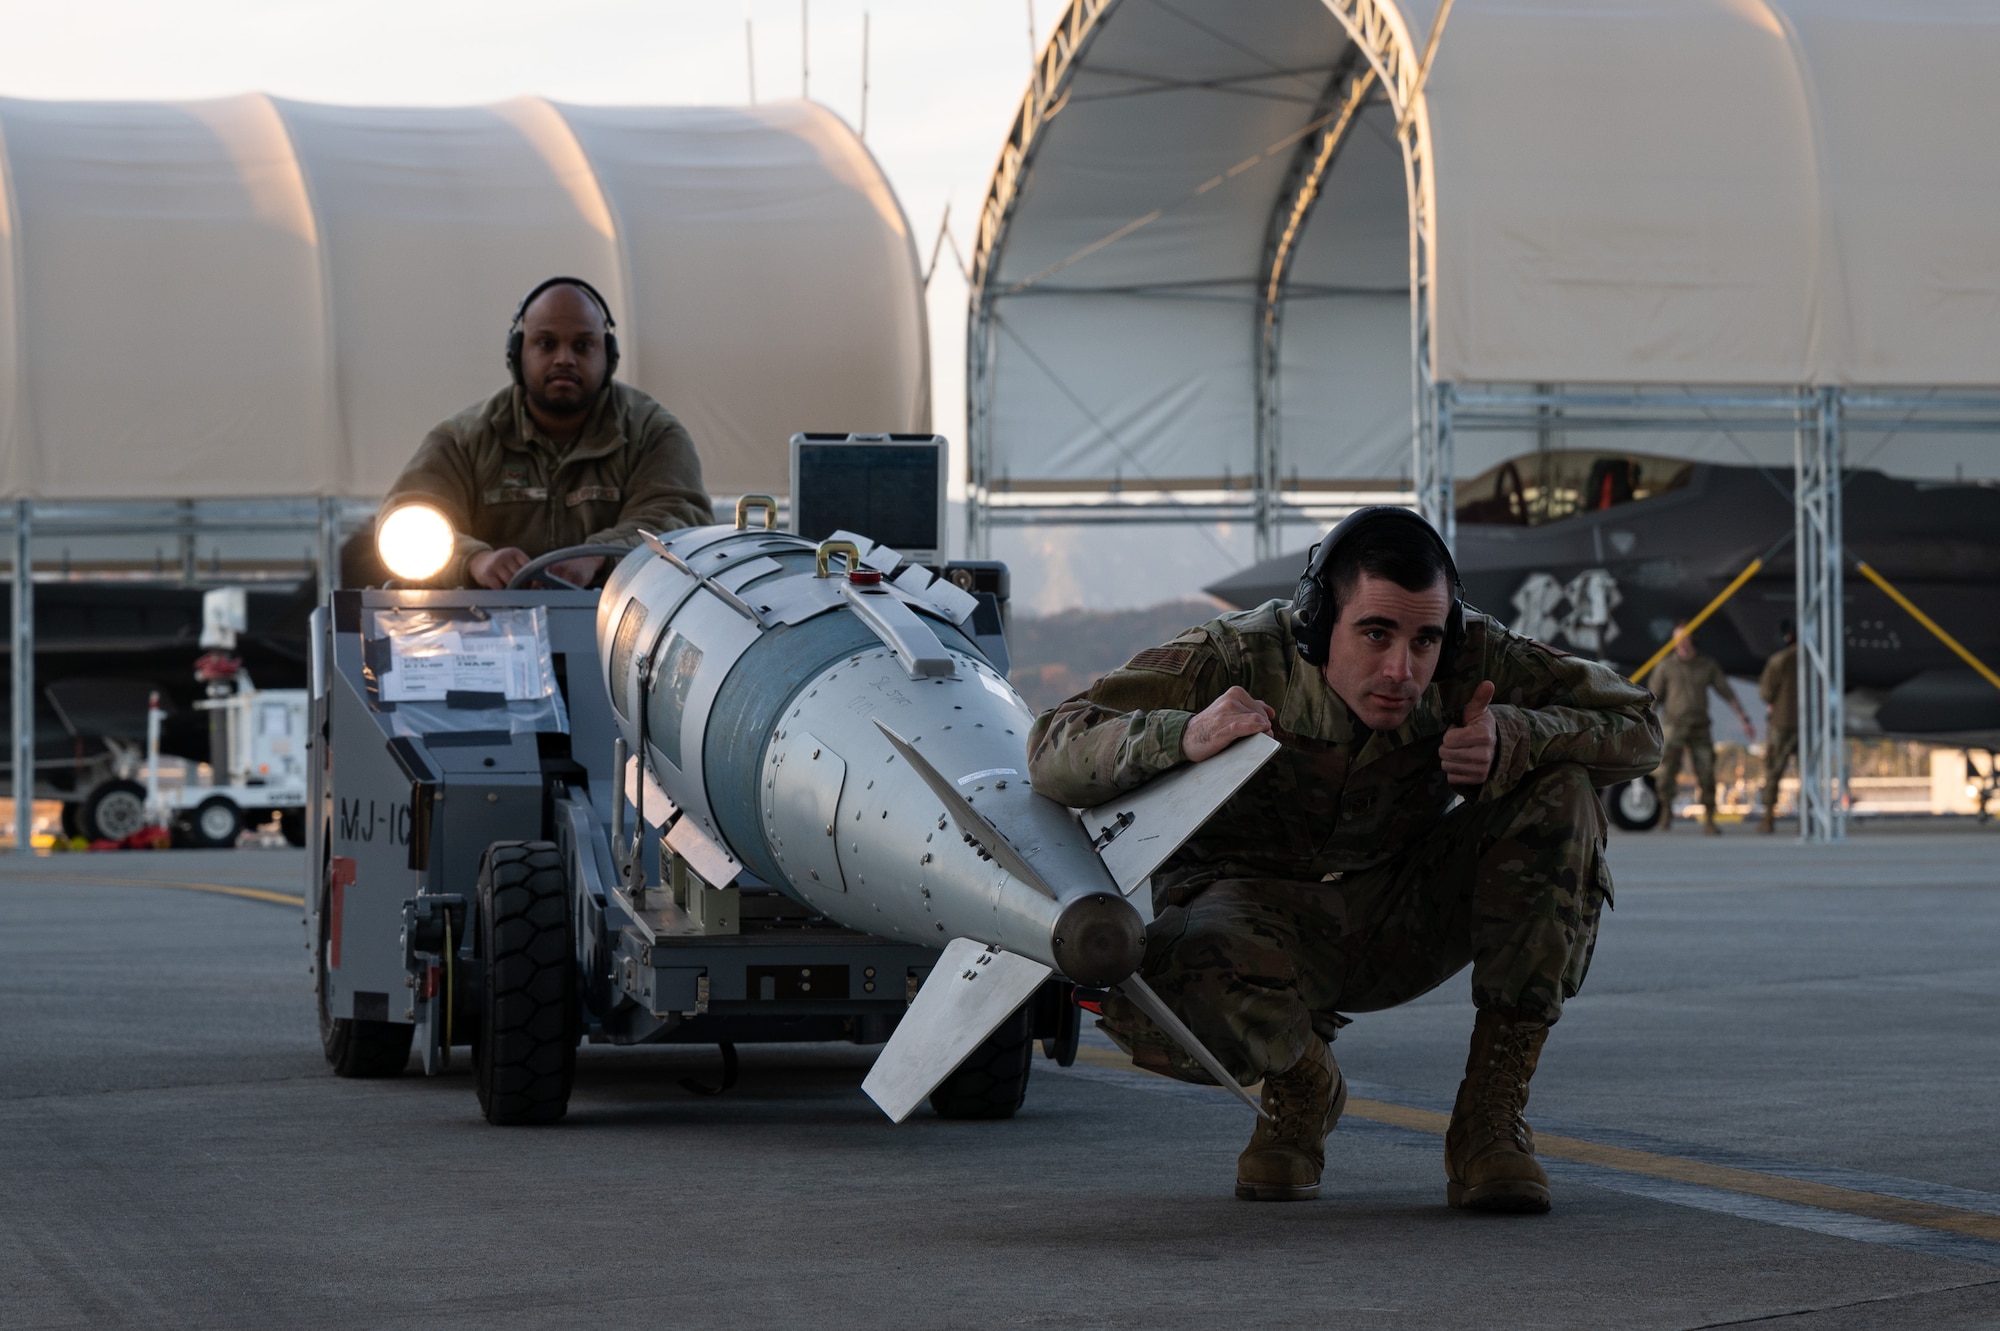 U.S. Air Force Senior Airman Kedrick Powe, left, a 354th Air Expeditionary Wing (AEW) weapons load crew member, and Staff Sgt. Joshua Bussard, a 354th AEW weapons load crew chief, prepare to install an inert GBU-31 bomb on an F-35A Lightning II during Operation Iron Dagger on Marine Corps Air Station Iwakuni, Japan, Dec. 9, 2021.